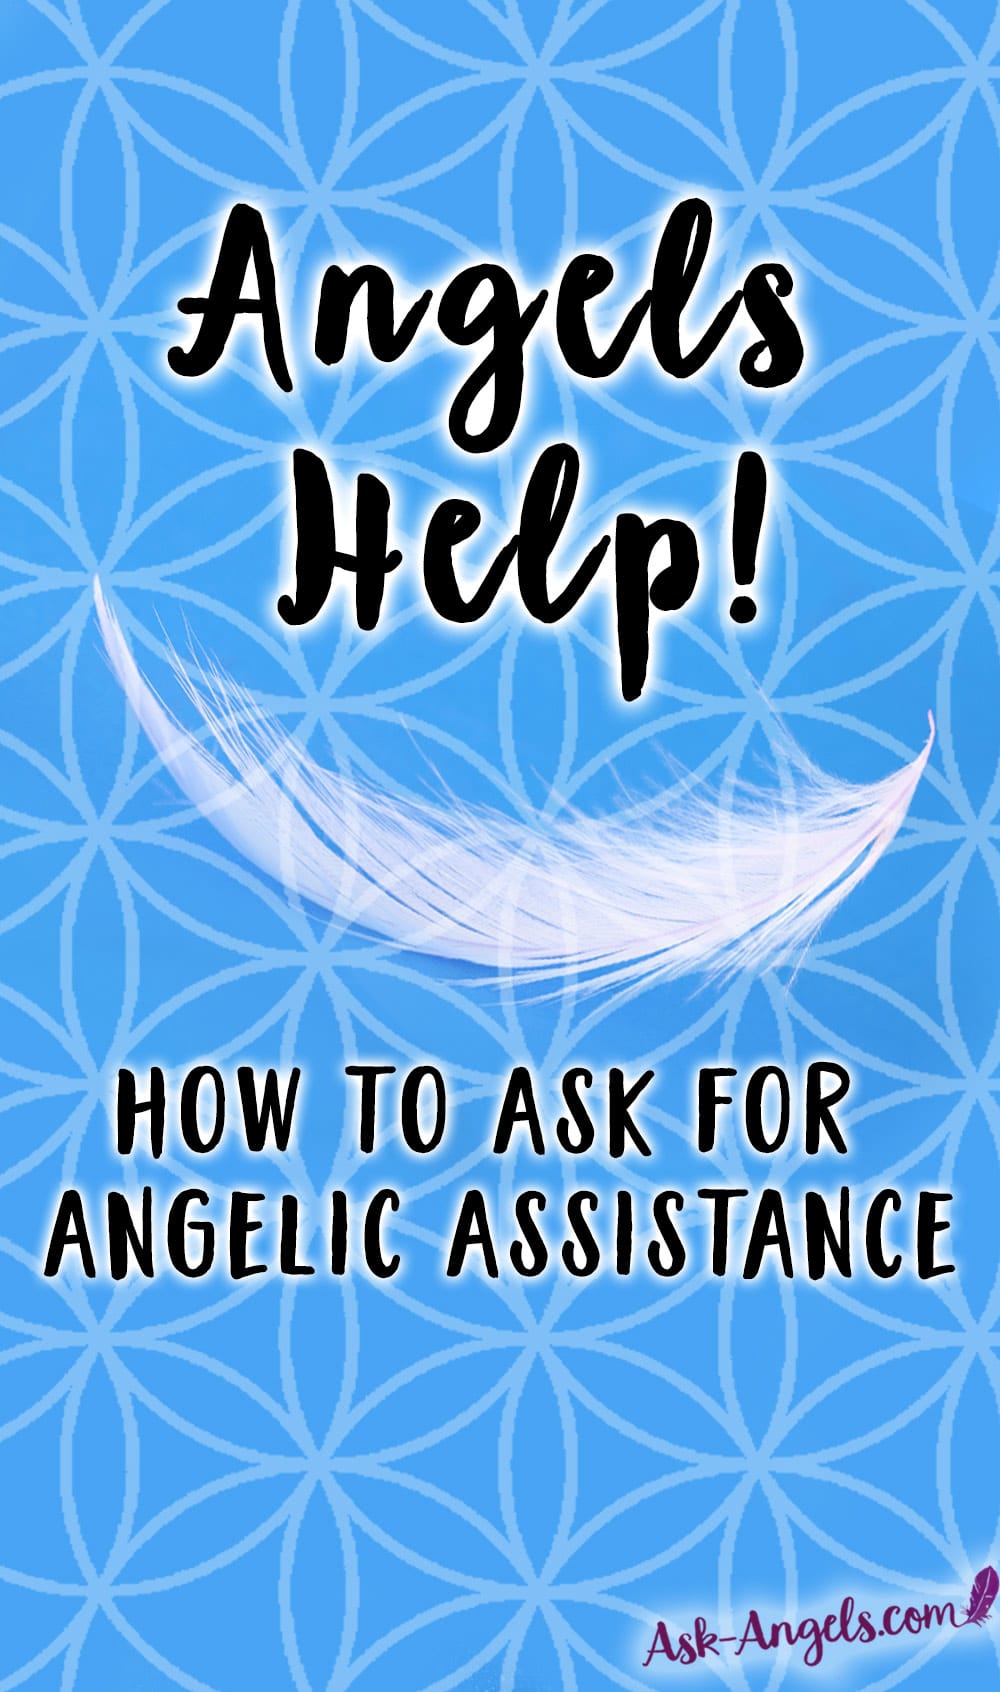 Spiritual guidance for invoking the Help of Angels with important tips and insight into how to ask for angelic help in your life.